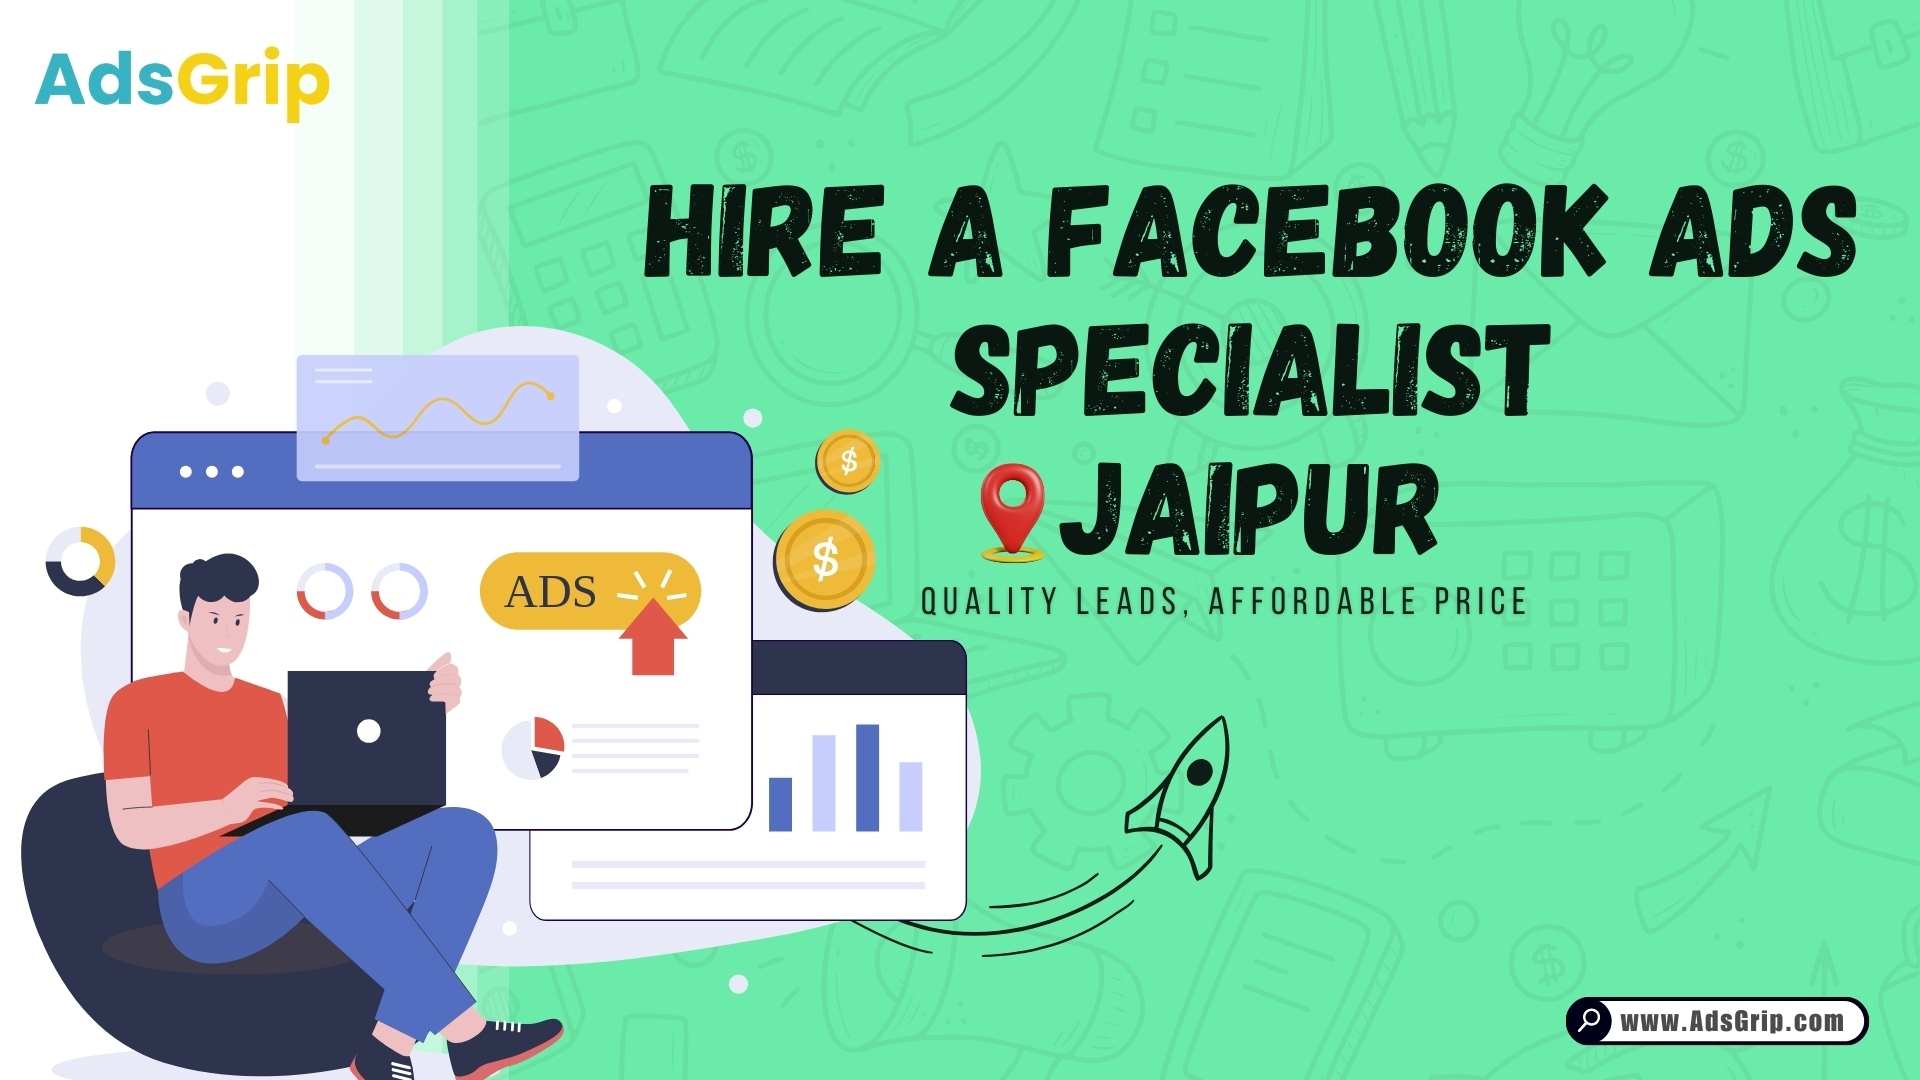 Hire Facebook Ads Specialist | Quality Leads, Affordable Price